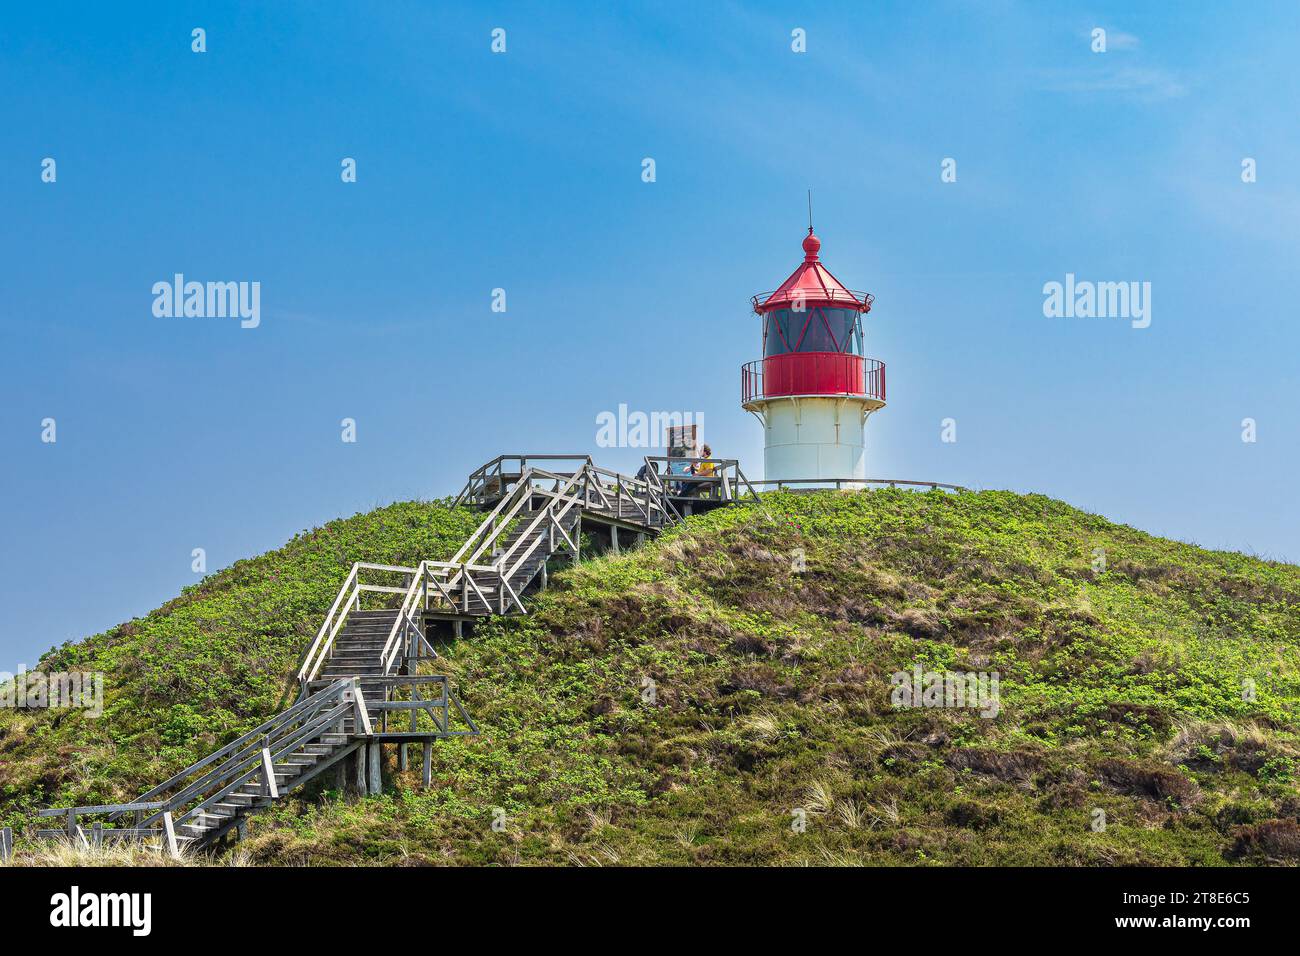 Cross fire in Norddorf on the North Sea island Amrum, Germany. Stock Photo